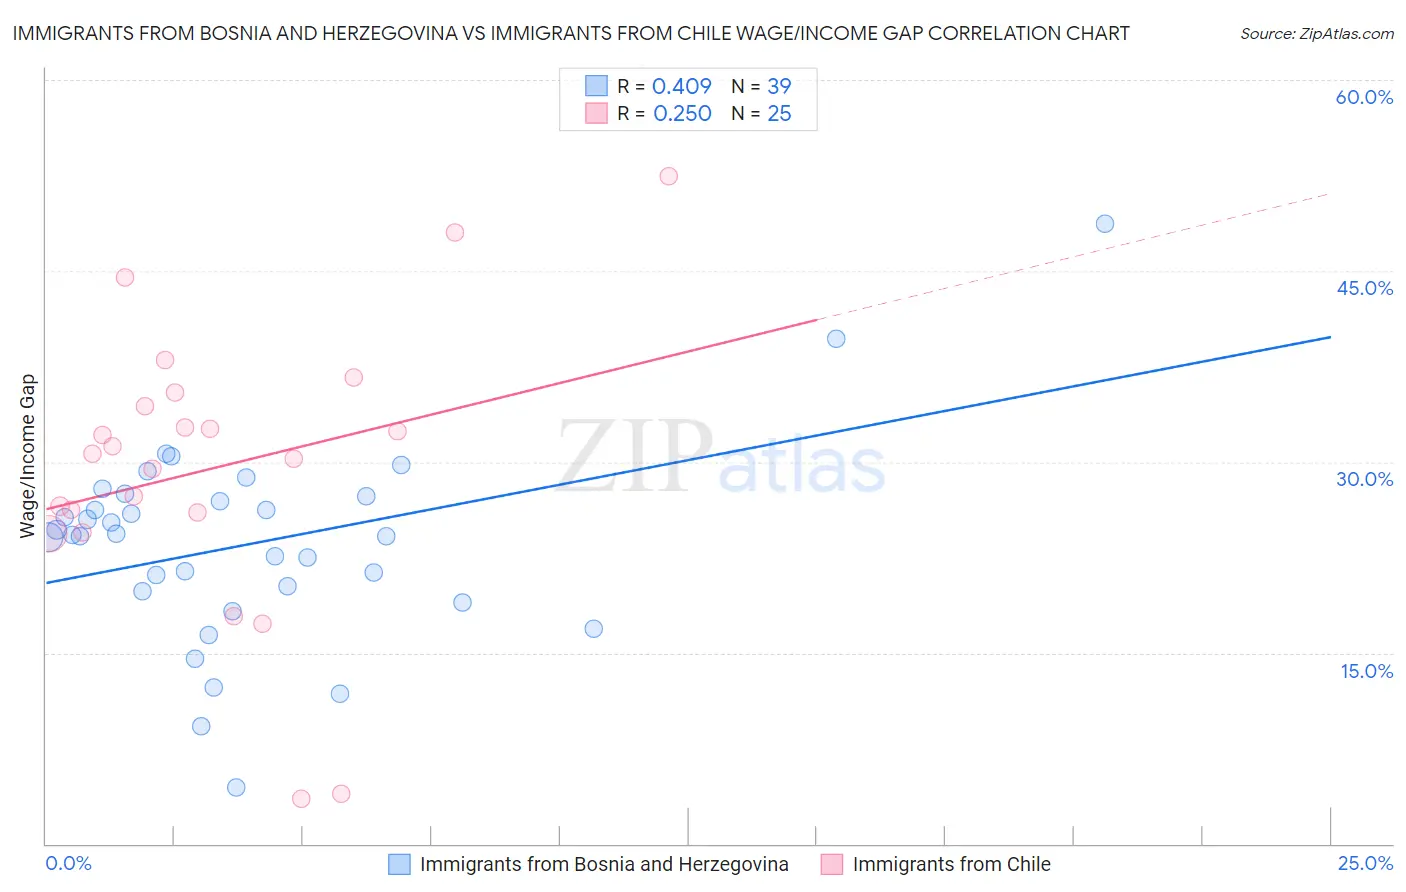 Immigrants from Bosnia and Herzegovina vs Immigrants from Chile Wage/Income Gap